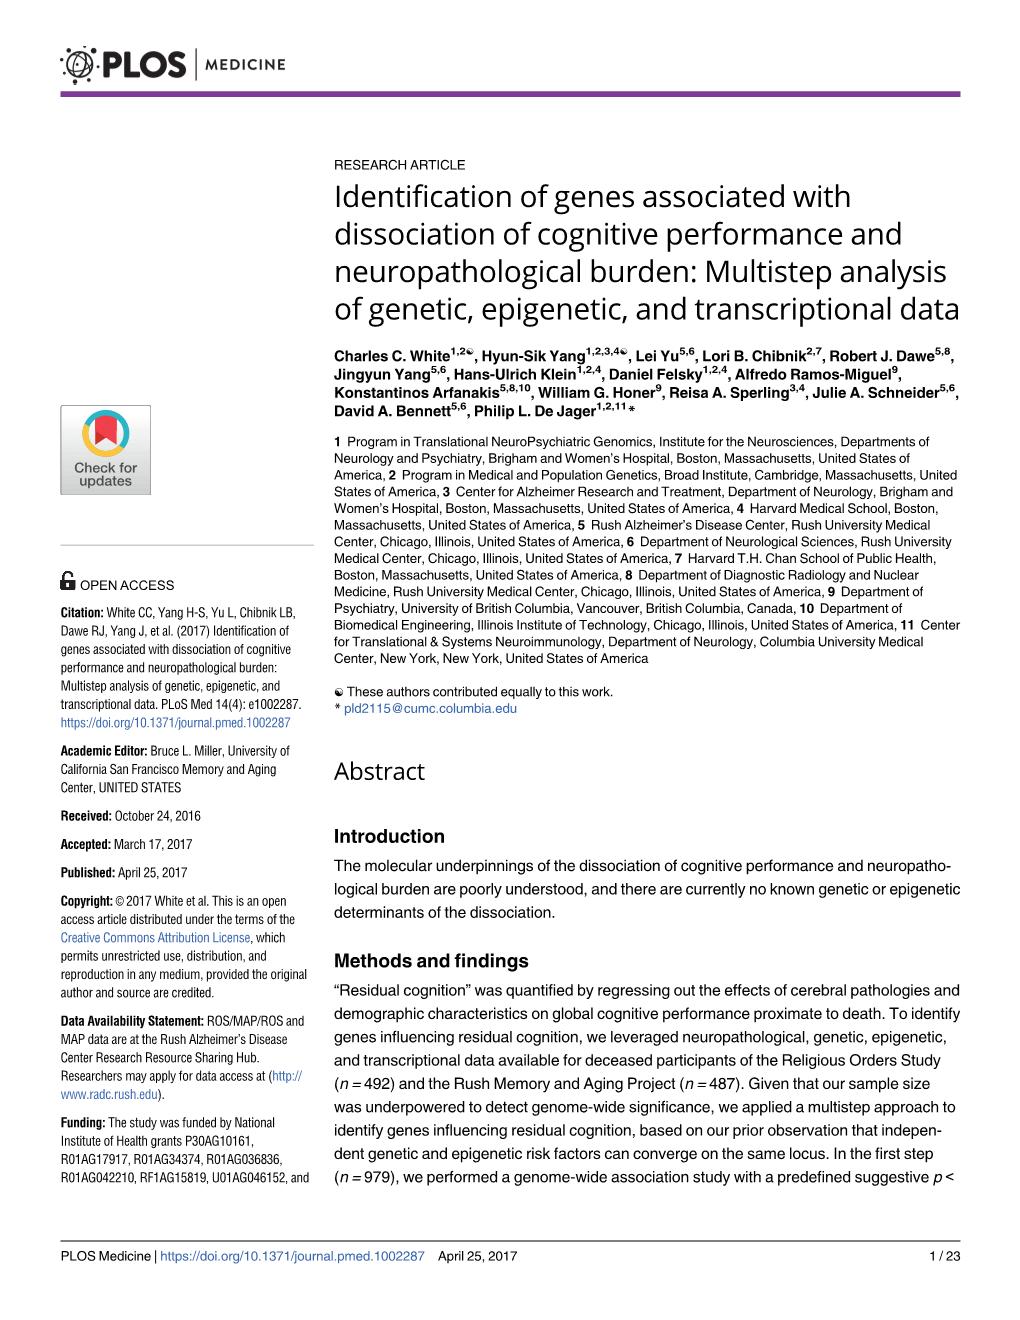 Identification of Genes Associated with Dissociation of Cognitive